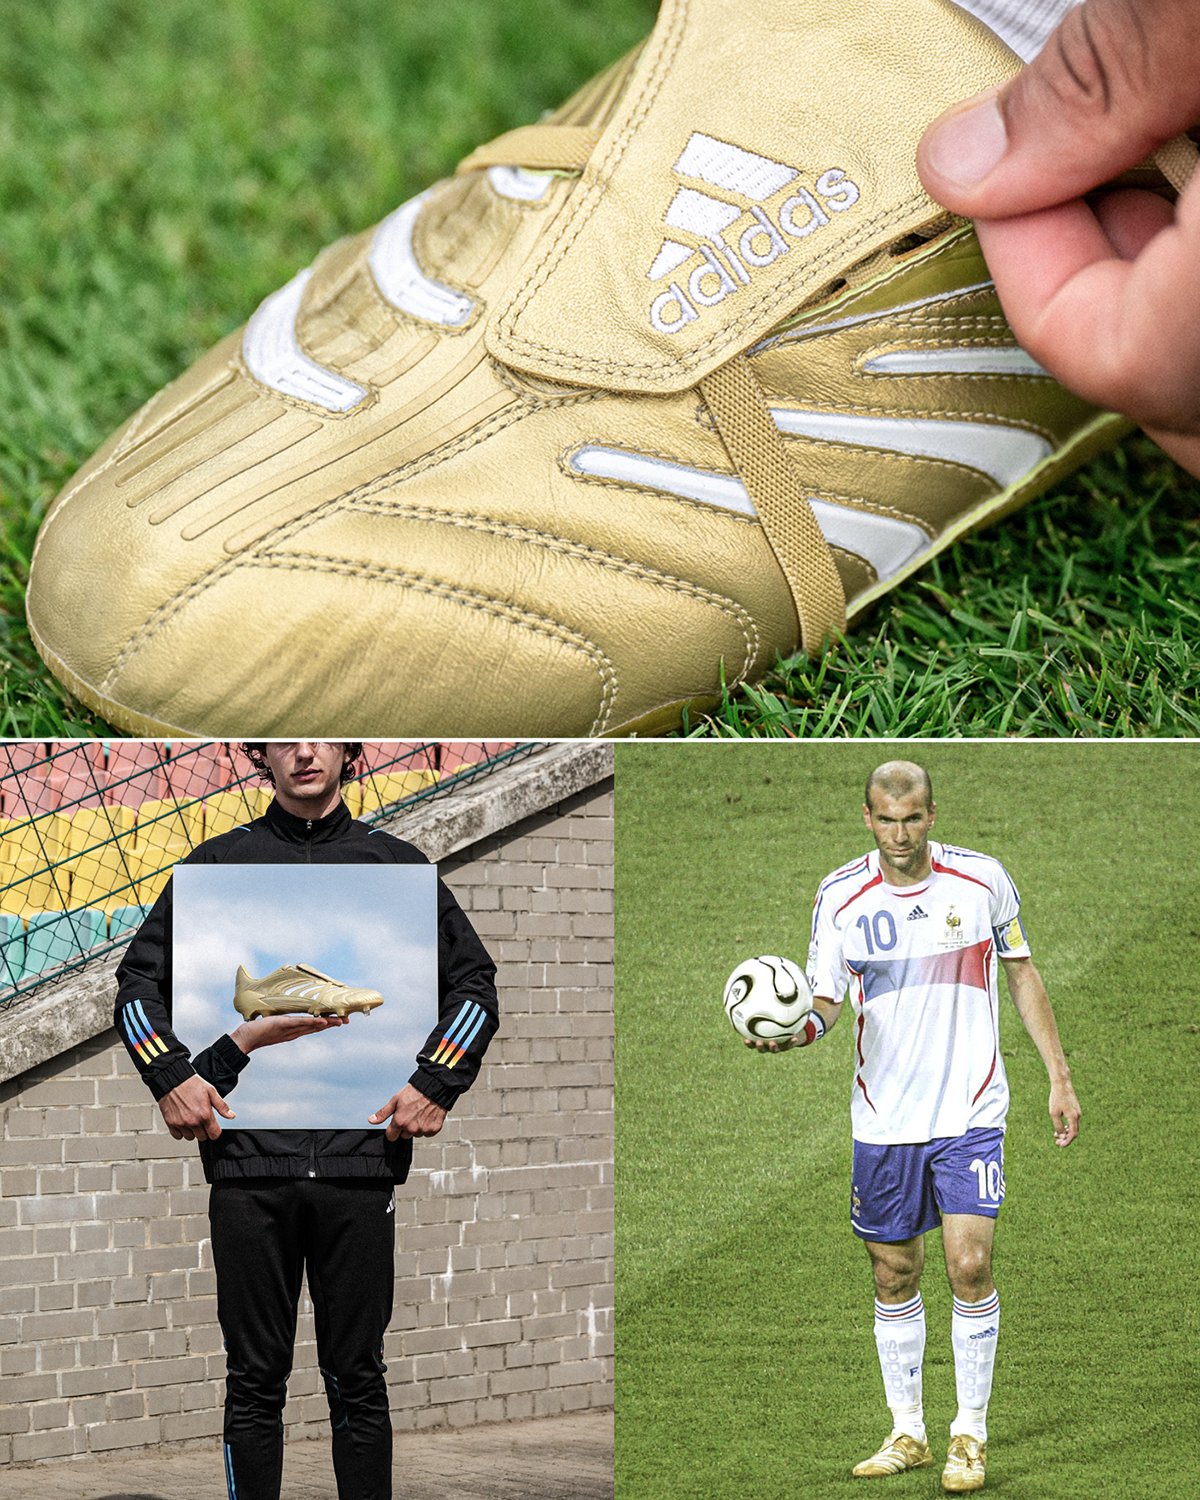 ESPN FC on Twitter: "Adidas have released the Gold Predator Absolute, worn Zidane in the 2006 World Cup. They're beautiful 🤩 / Twitter